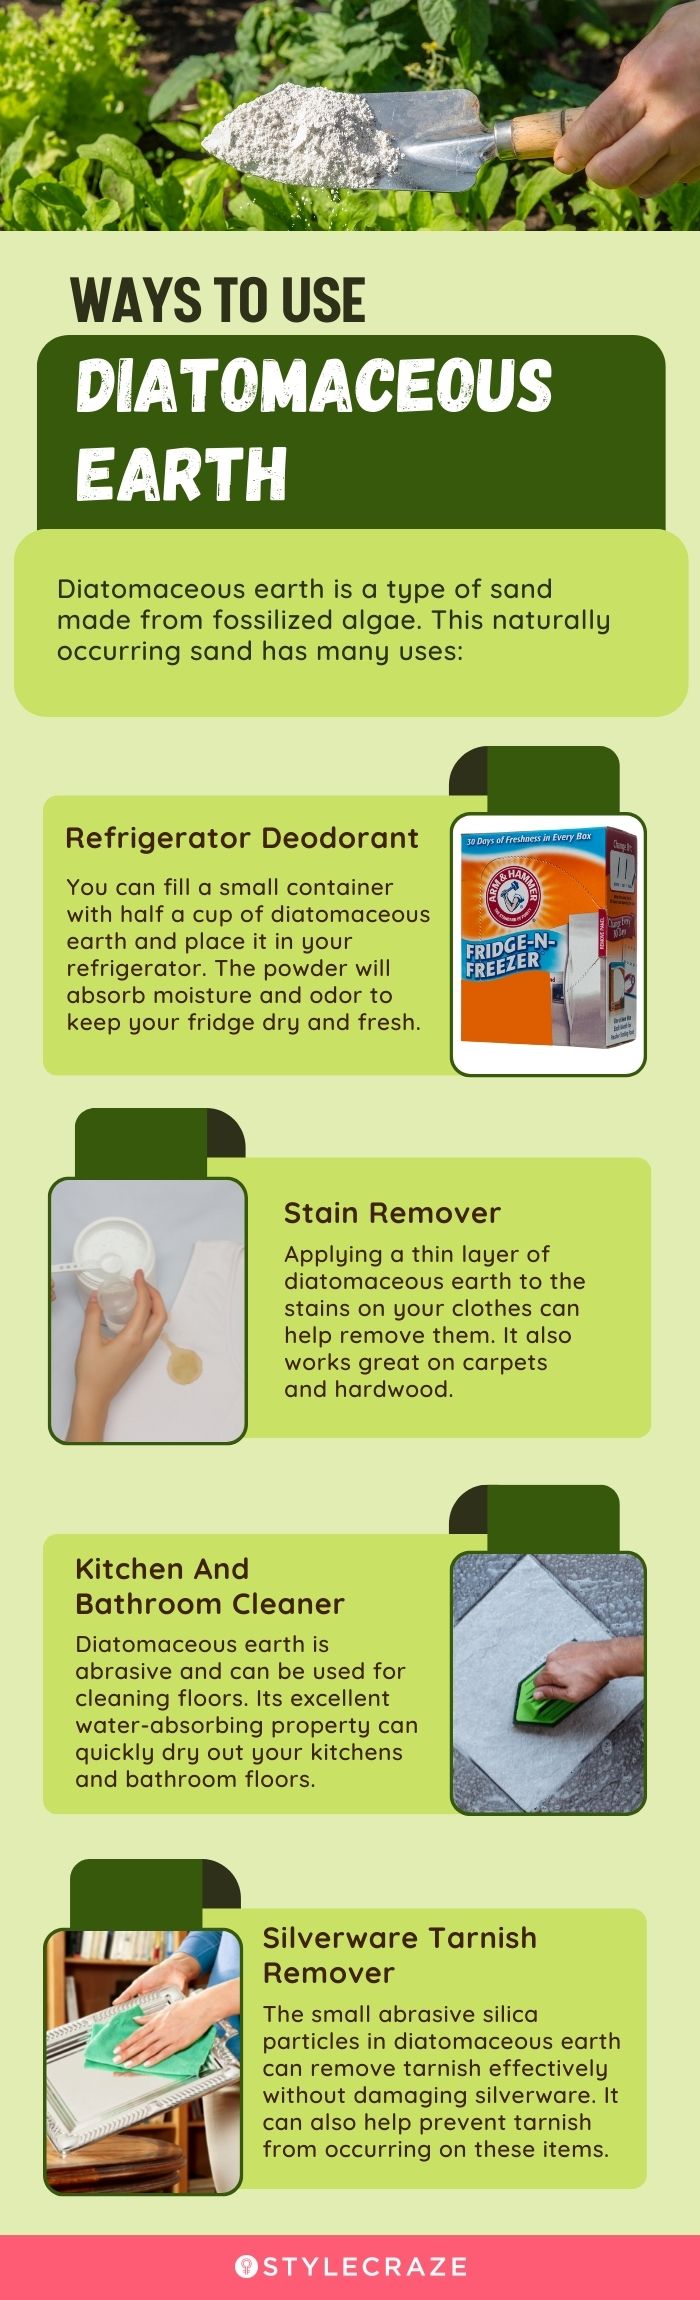 ways to use diatomaceous earth (infographic)